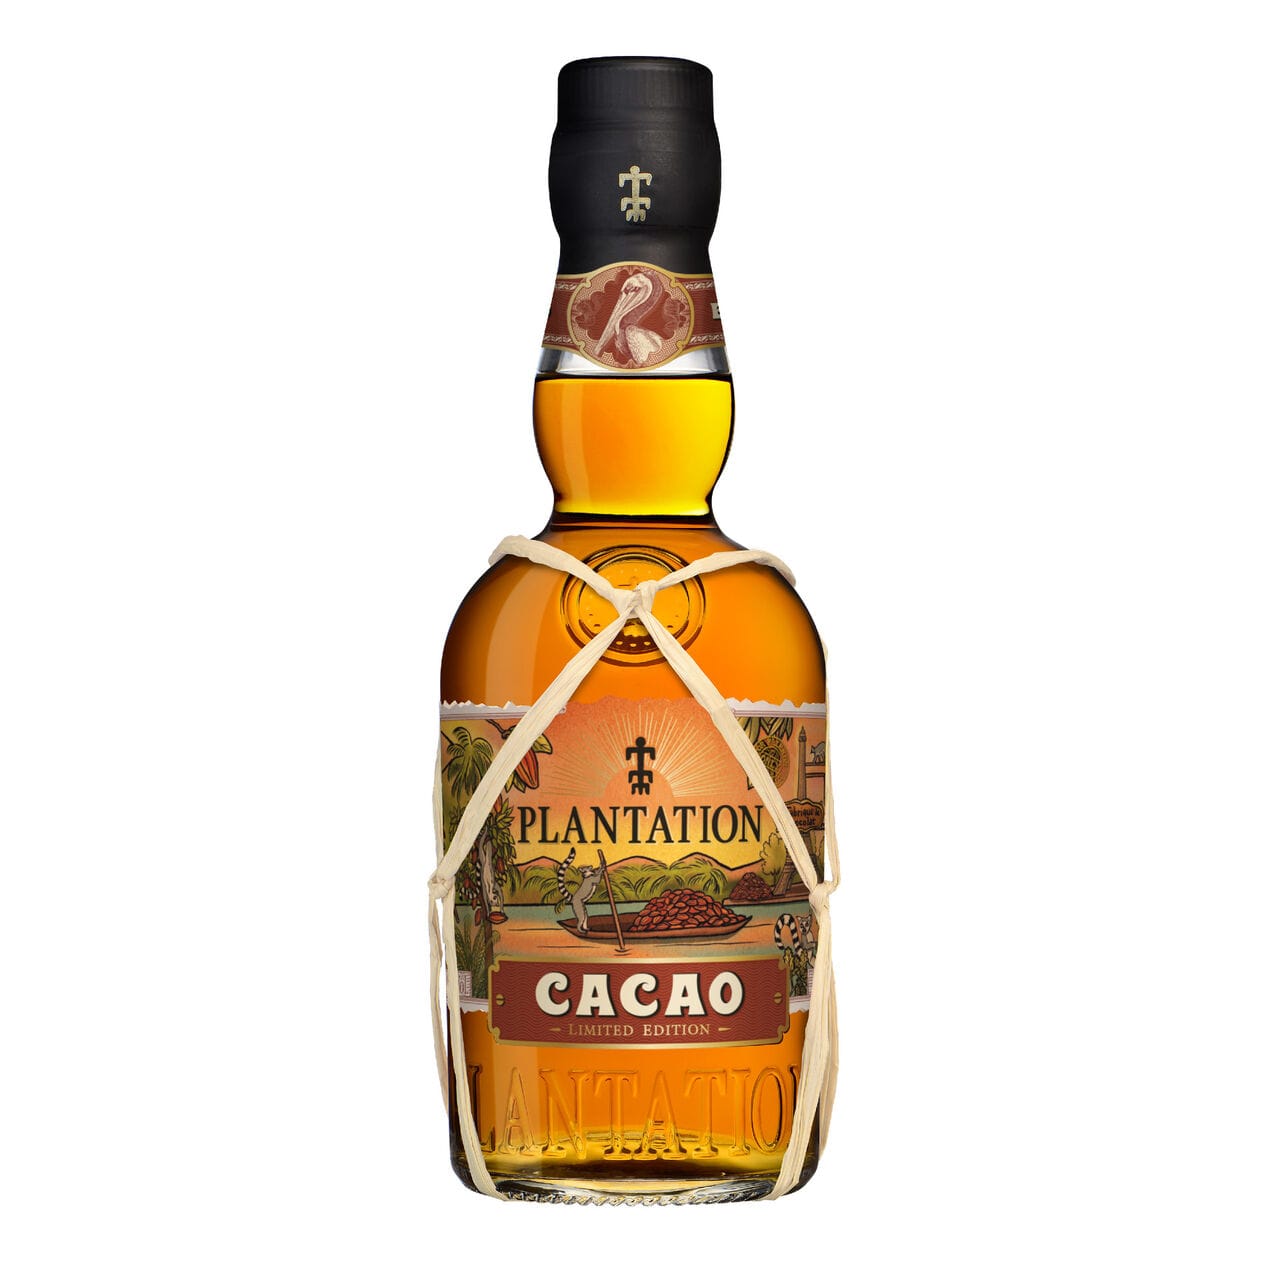 Plantation Rum meets cocoa for a gourmet duo in a limited edition